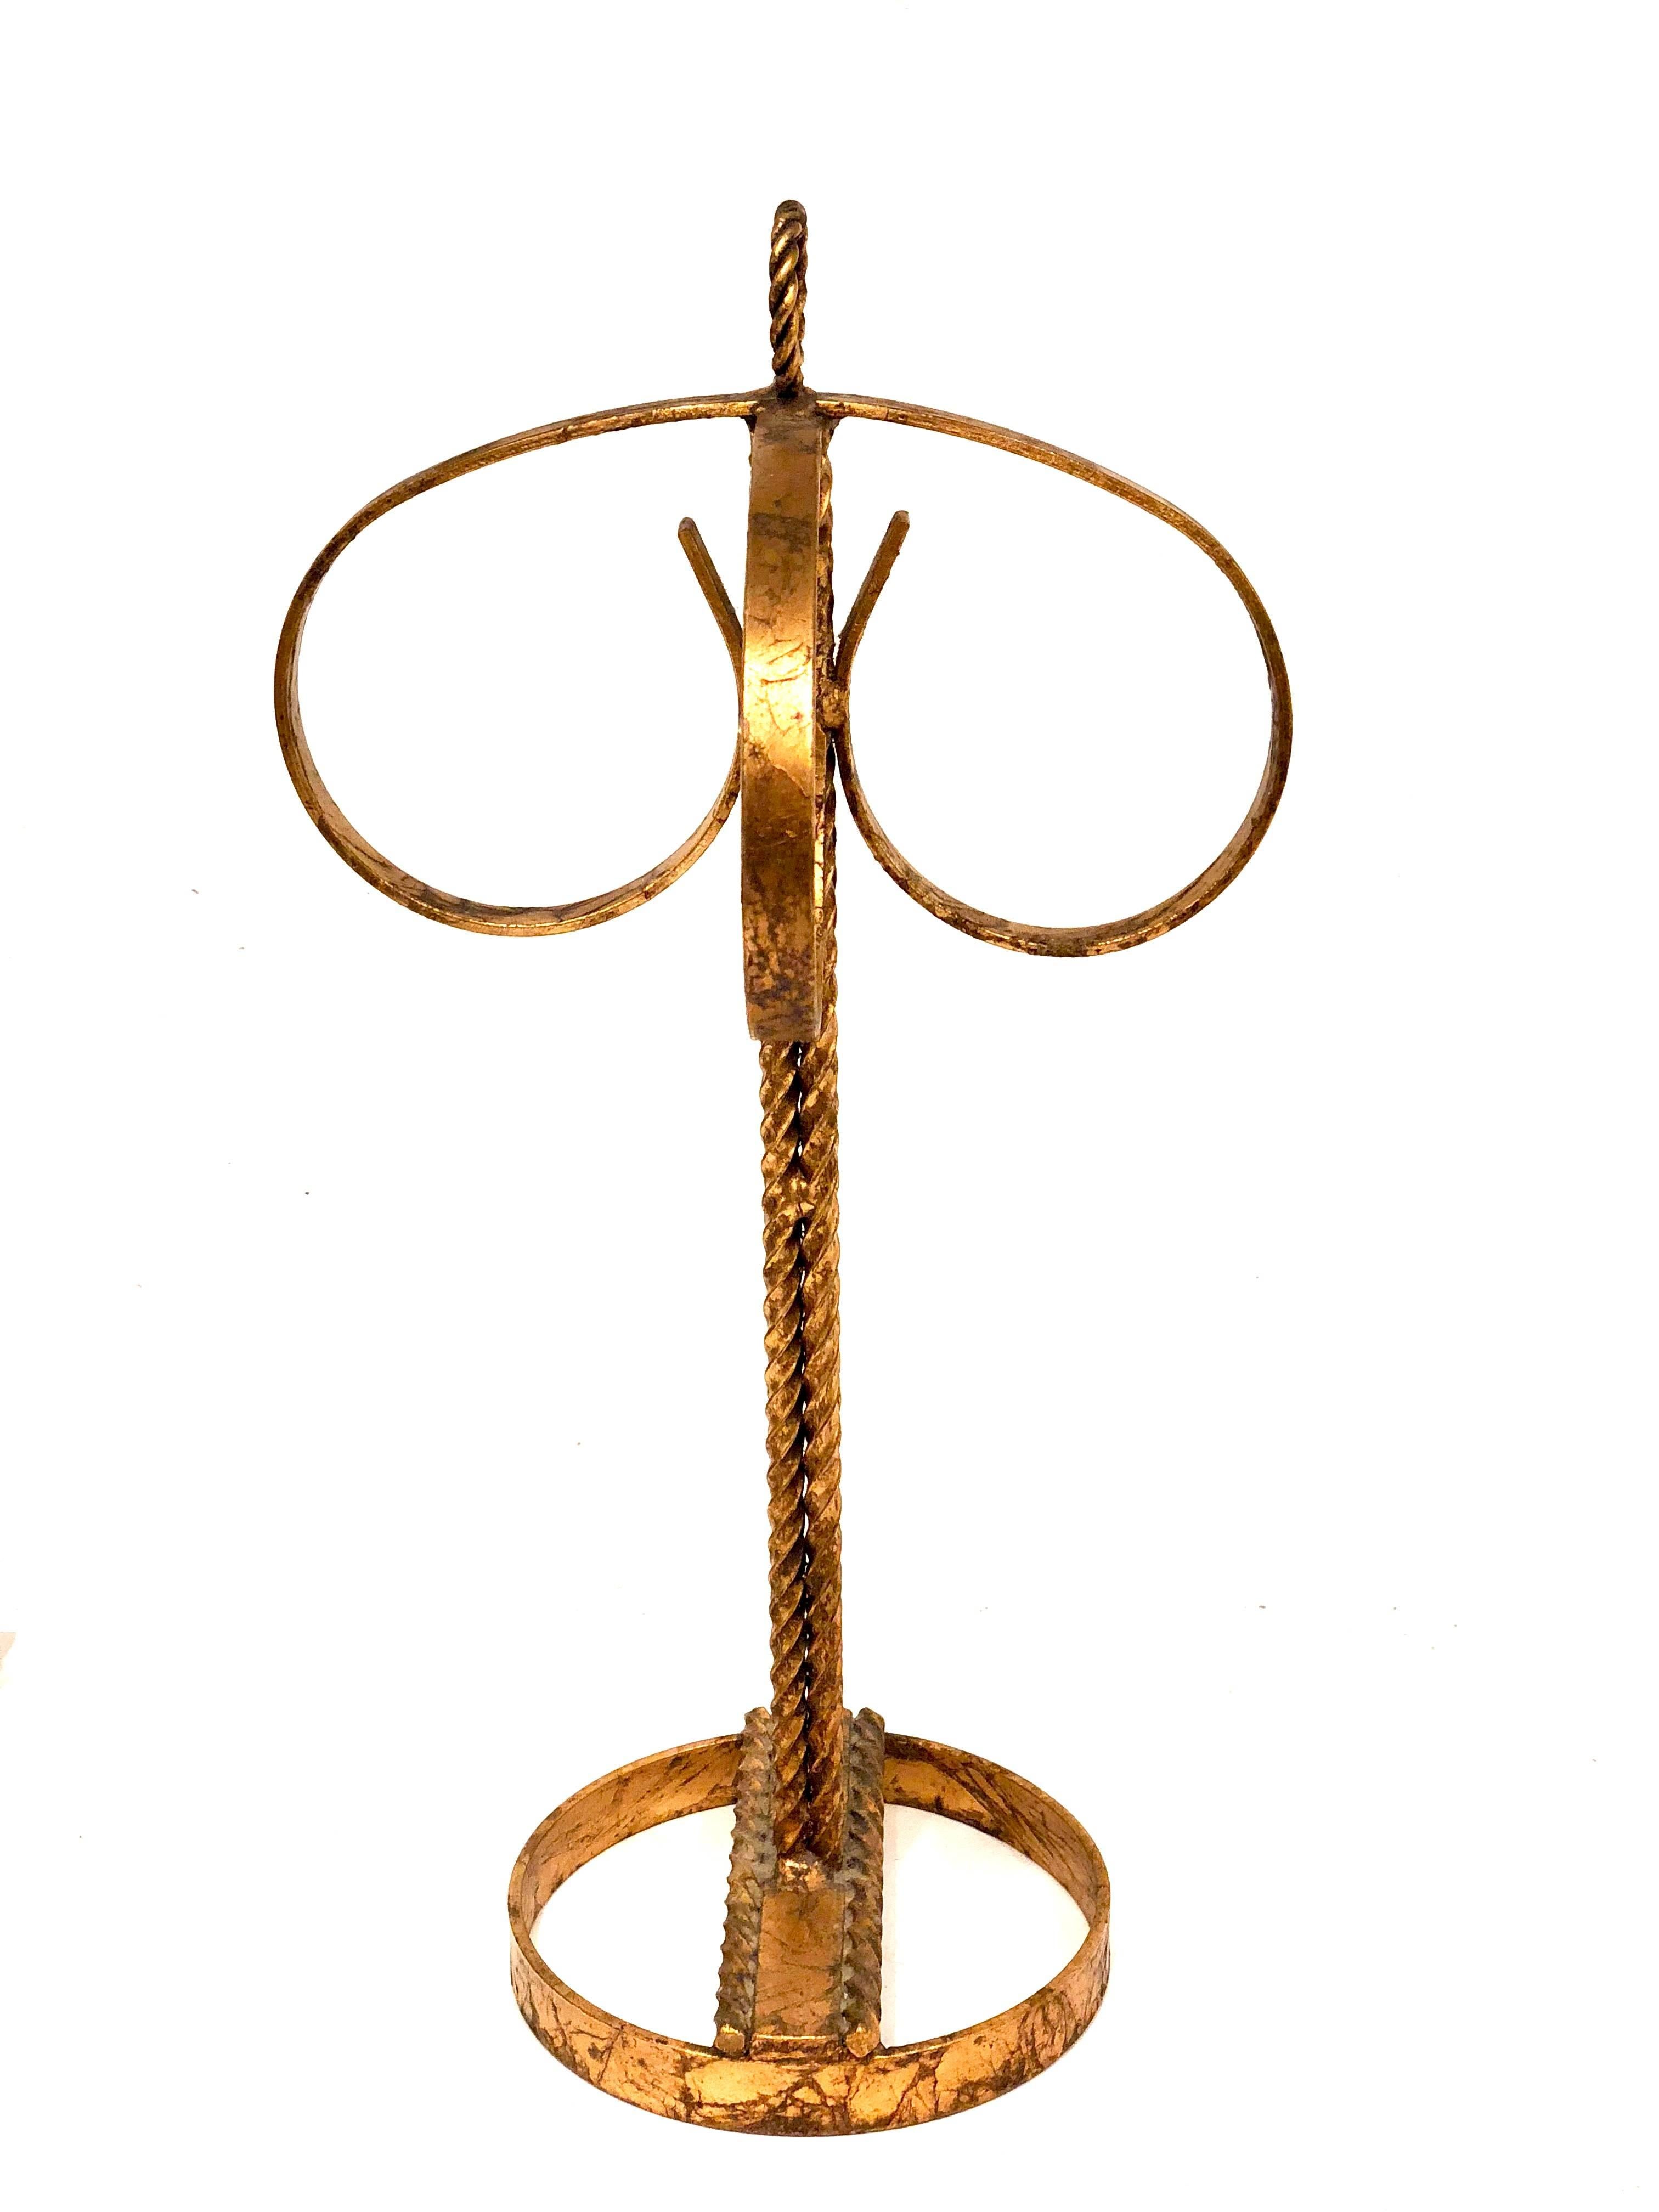 Elegant Italian gold guild towel holder, circa 1950's in excellent condition with 4 towels rings.